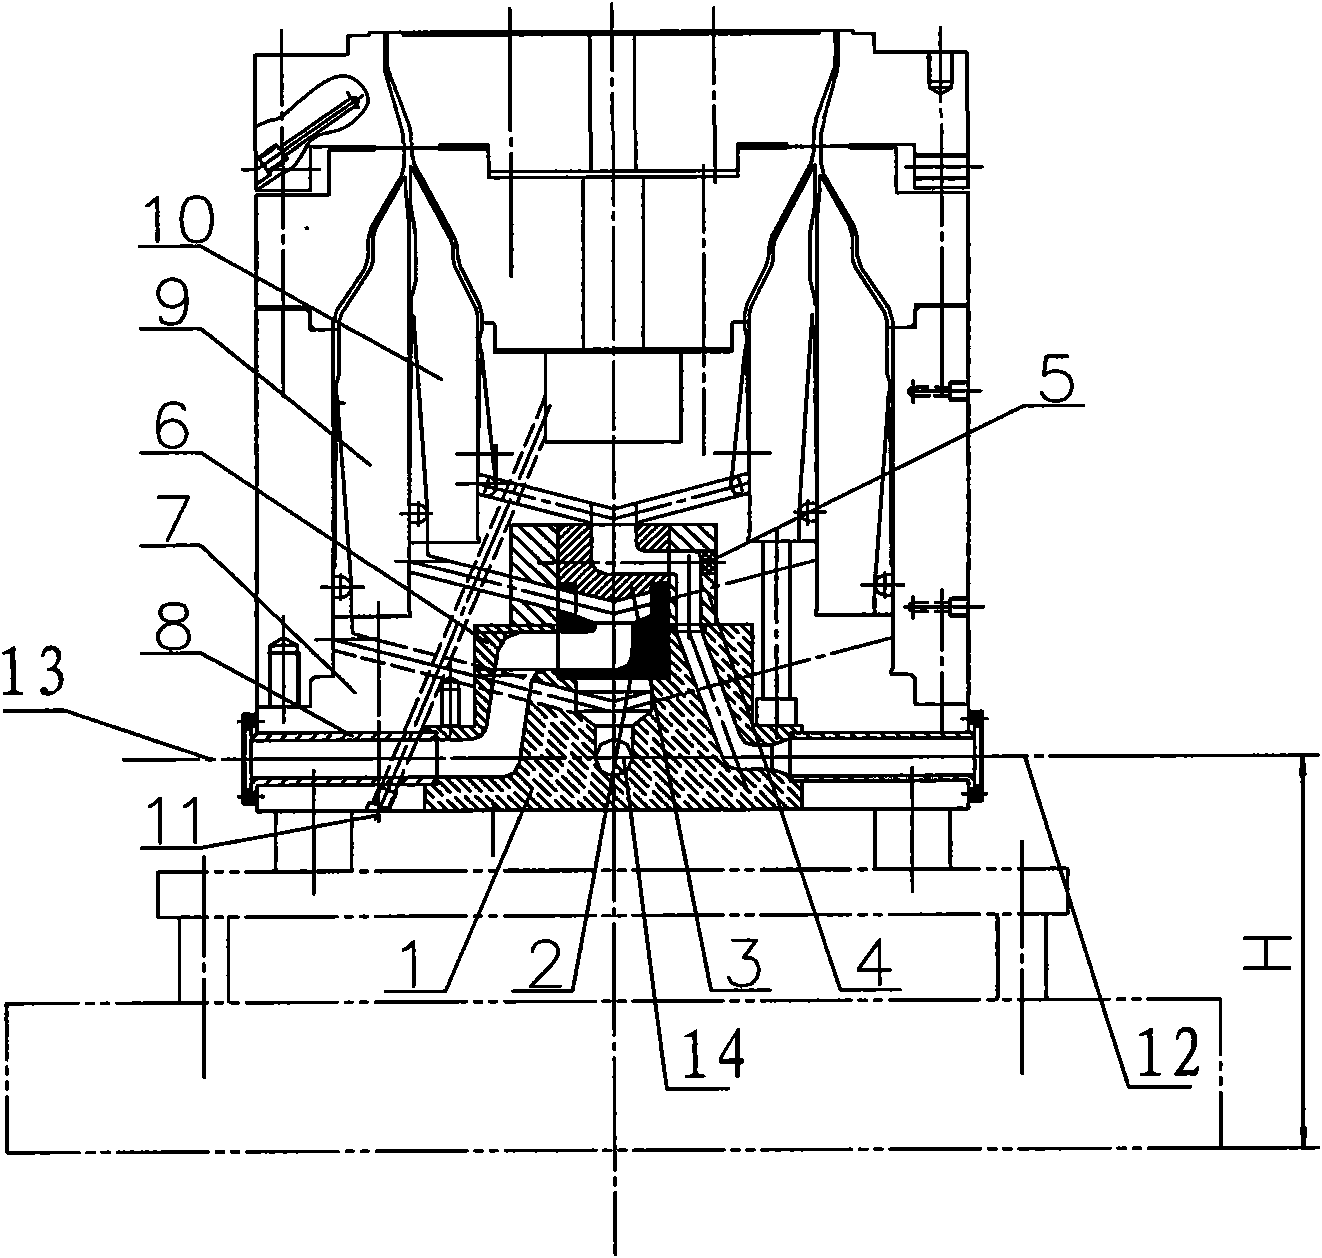 Triple extrusion die head with low center